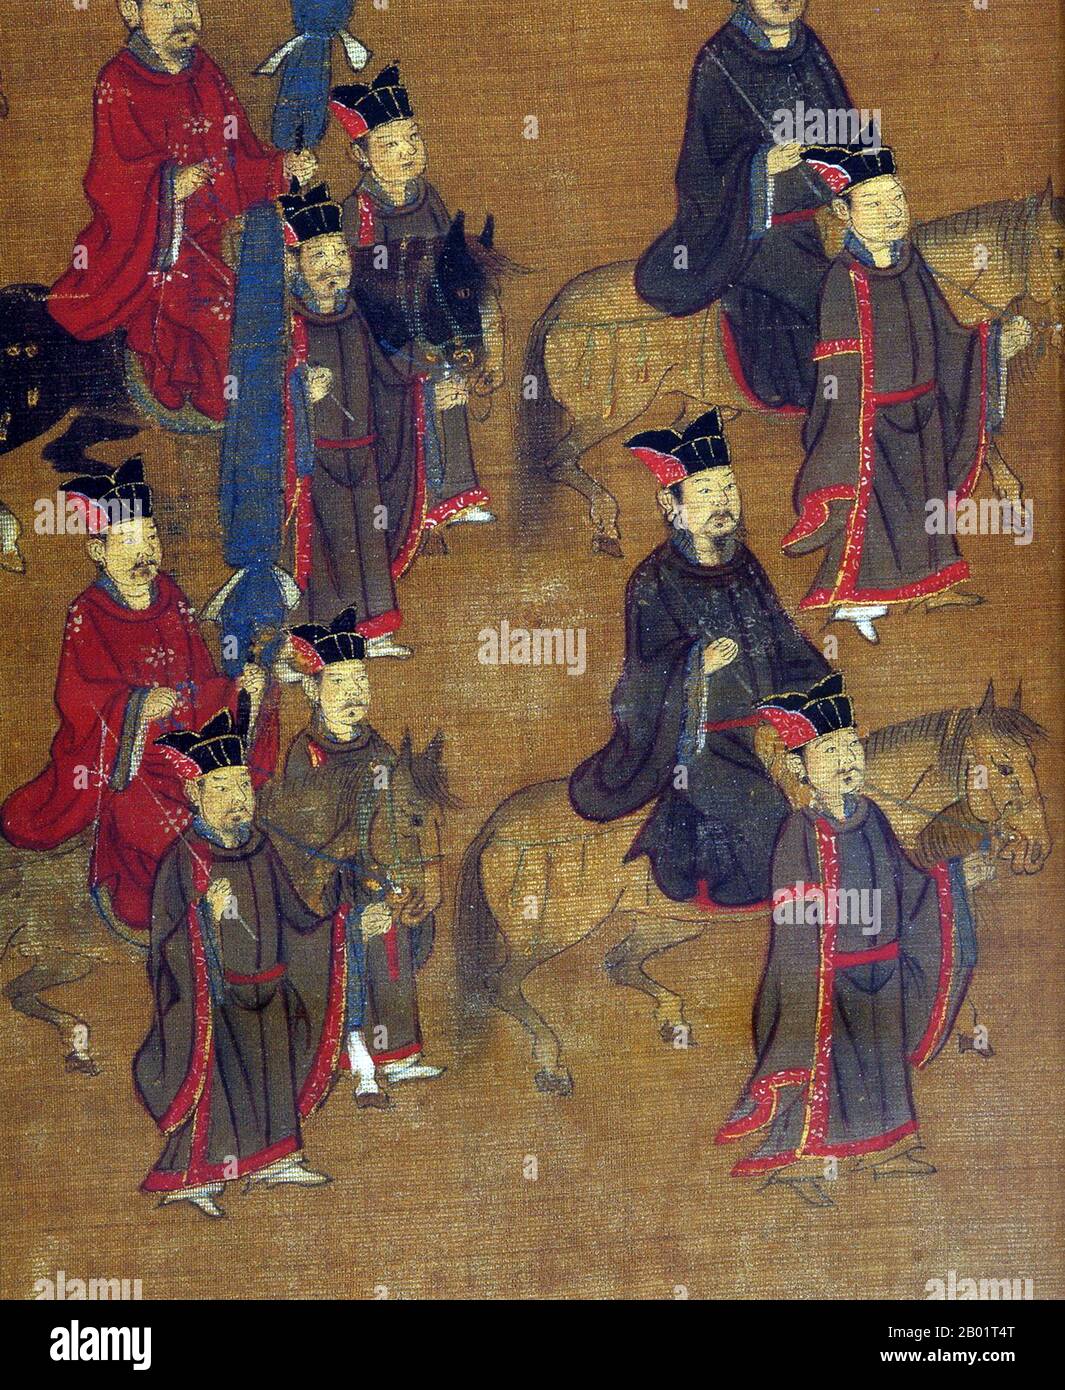 The Song Dynasty (960–1279) was an imperial dynasty of China that succeeded the Five Dynasties and Ten Kingdoms Period (907–960) and preceded the Yuan Dynasty (1271–1368), which conquered the Song in 1279. Its conventional division into the Northern Song (960–1127) and Southern Song (1127–1279) periods marks the conquest of northern China by the Jin Dynasty (1115–1234) in 1127. It also distinguishes the subsequent shift of the Song's capital city from Bianjing (modern Kaifeng) in the north to Lin'an (modern Hangzhou) in the south. Stock Photo